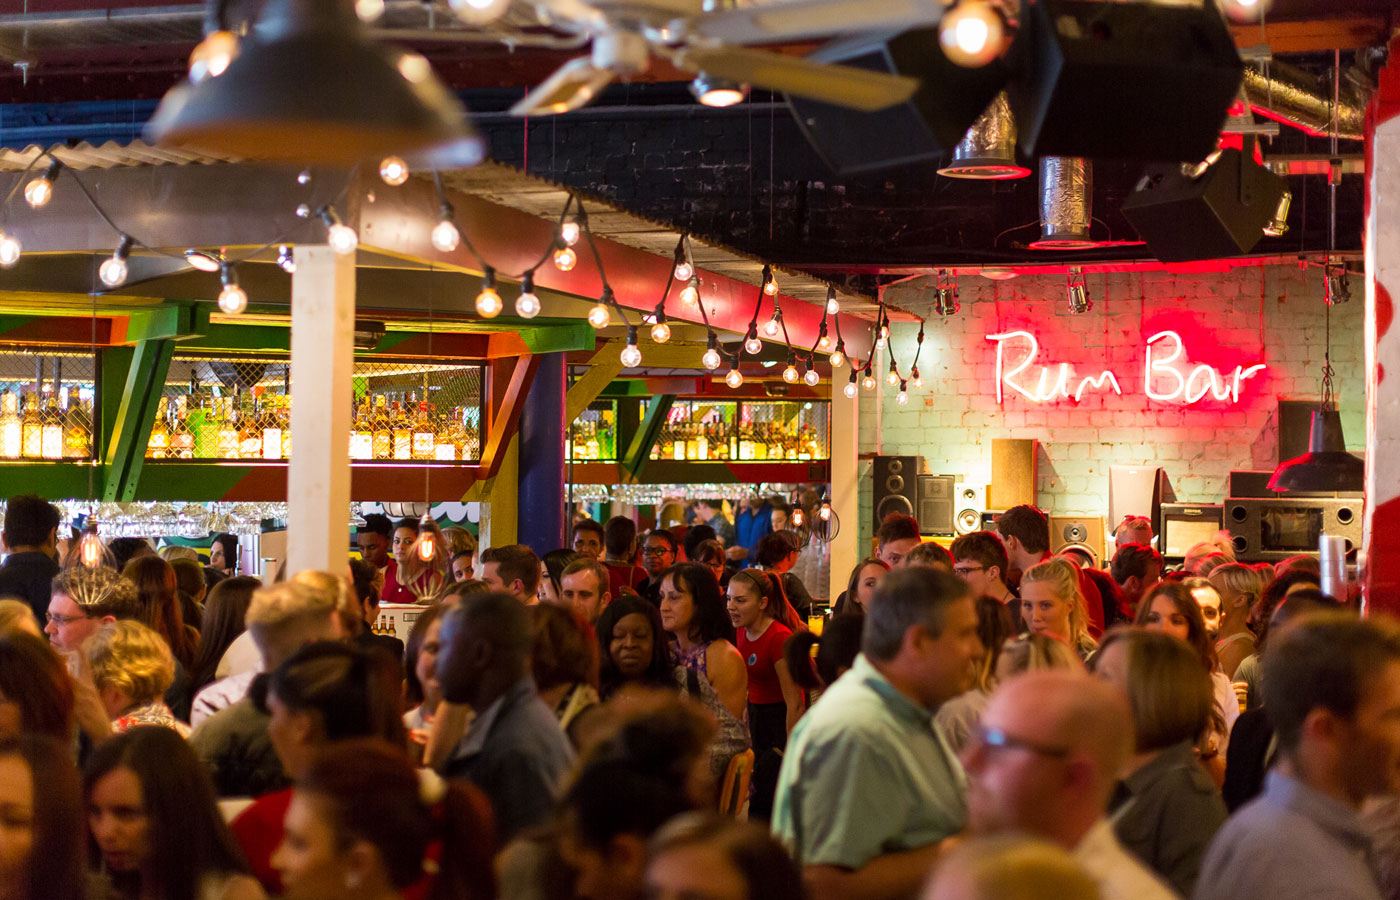 Busy: Turtle Bay's Brixton branch. Photo: Turtle Bay